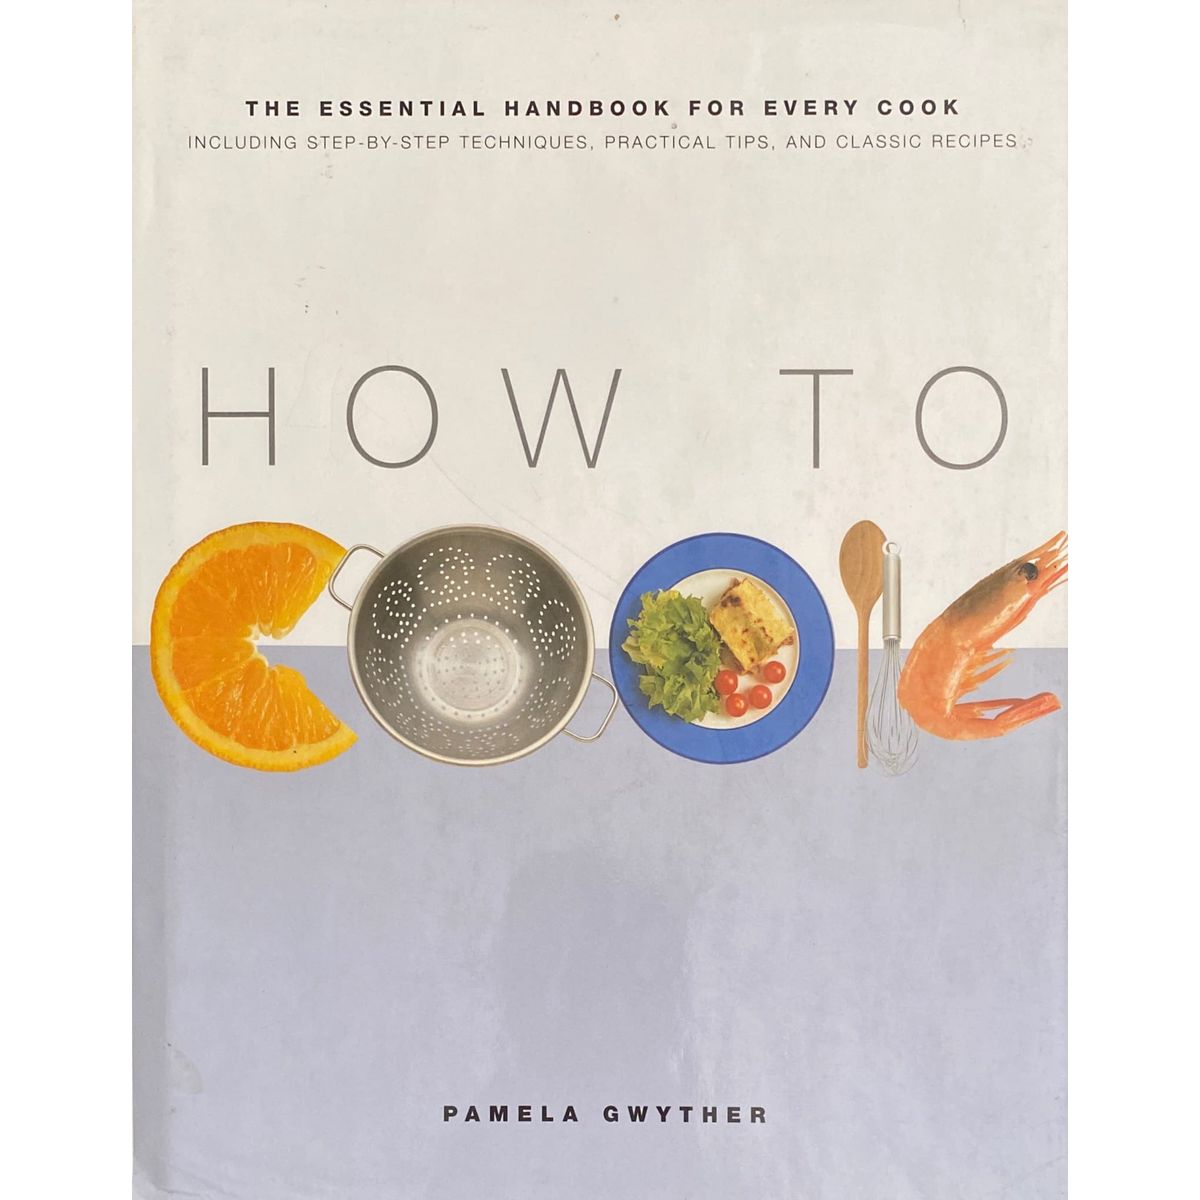 ISBN: 9781842733042 / 1842733044 - How To Cook: The Essential Handbook for Every Cook by Pamela Gwyther [2001]